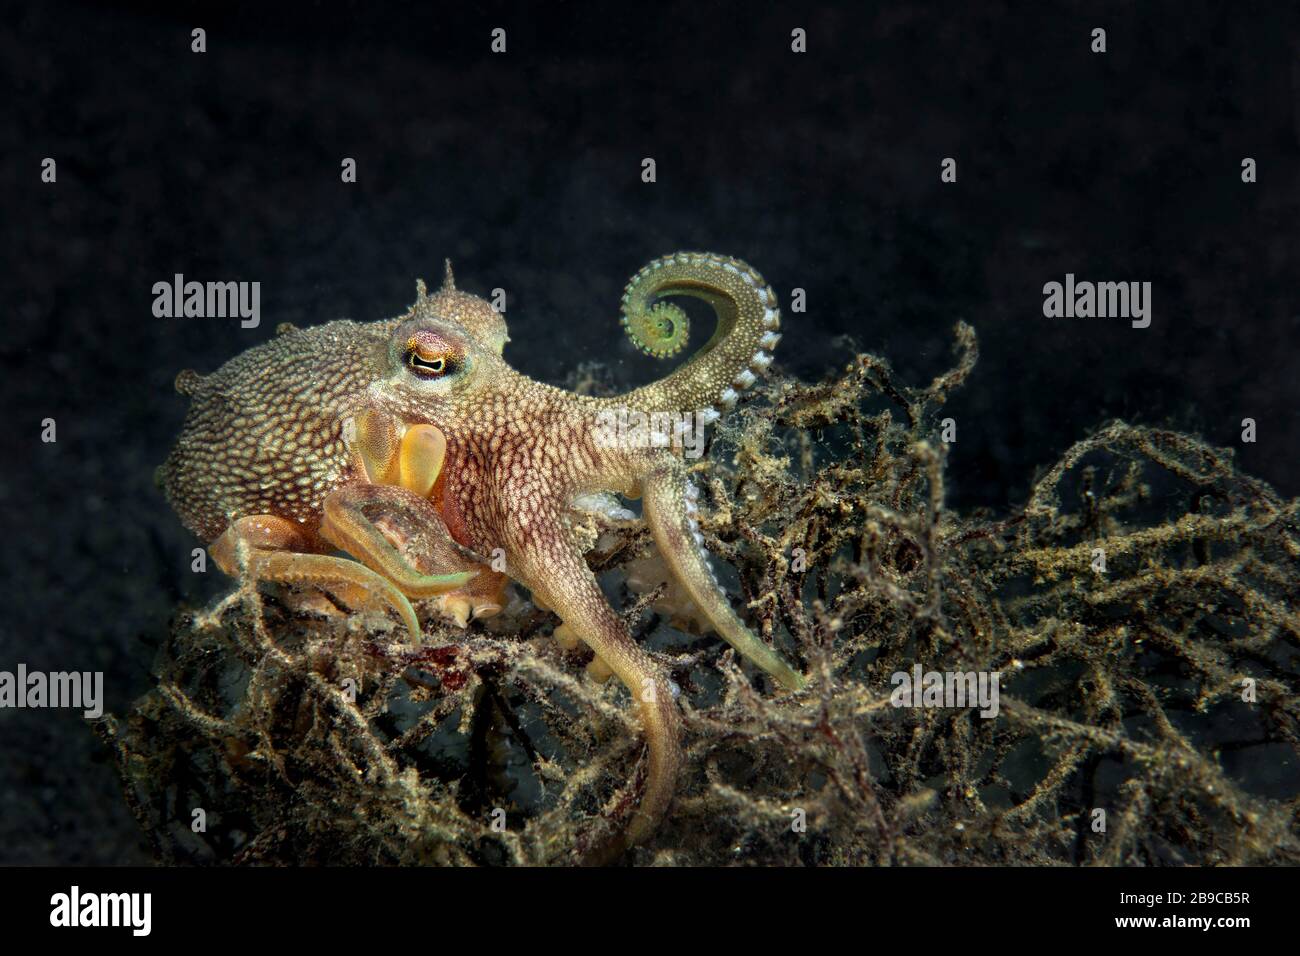 A coconut octopus makes its way over a tangle of sea weed. Stock Photo